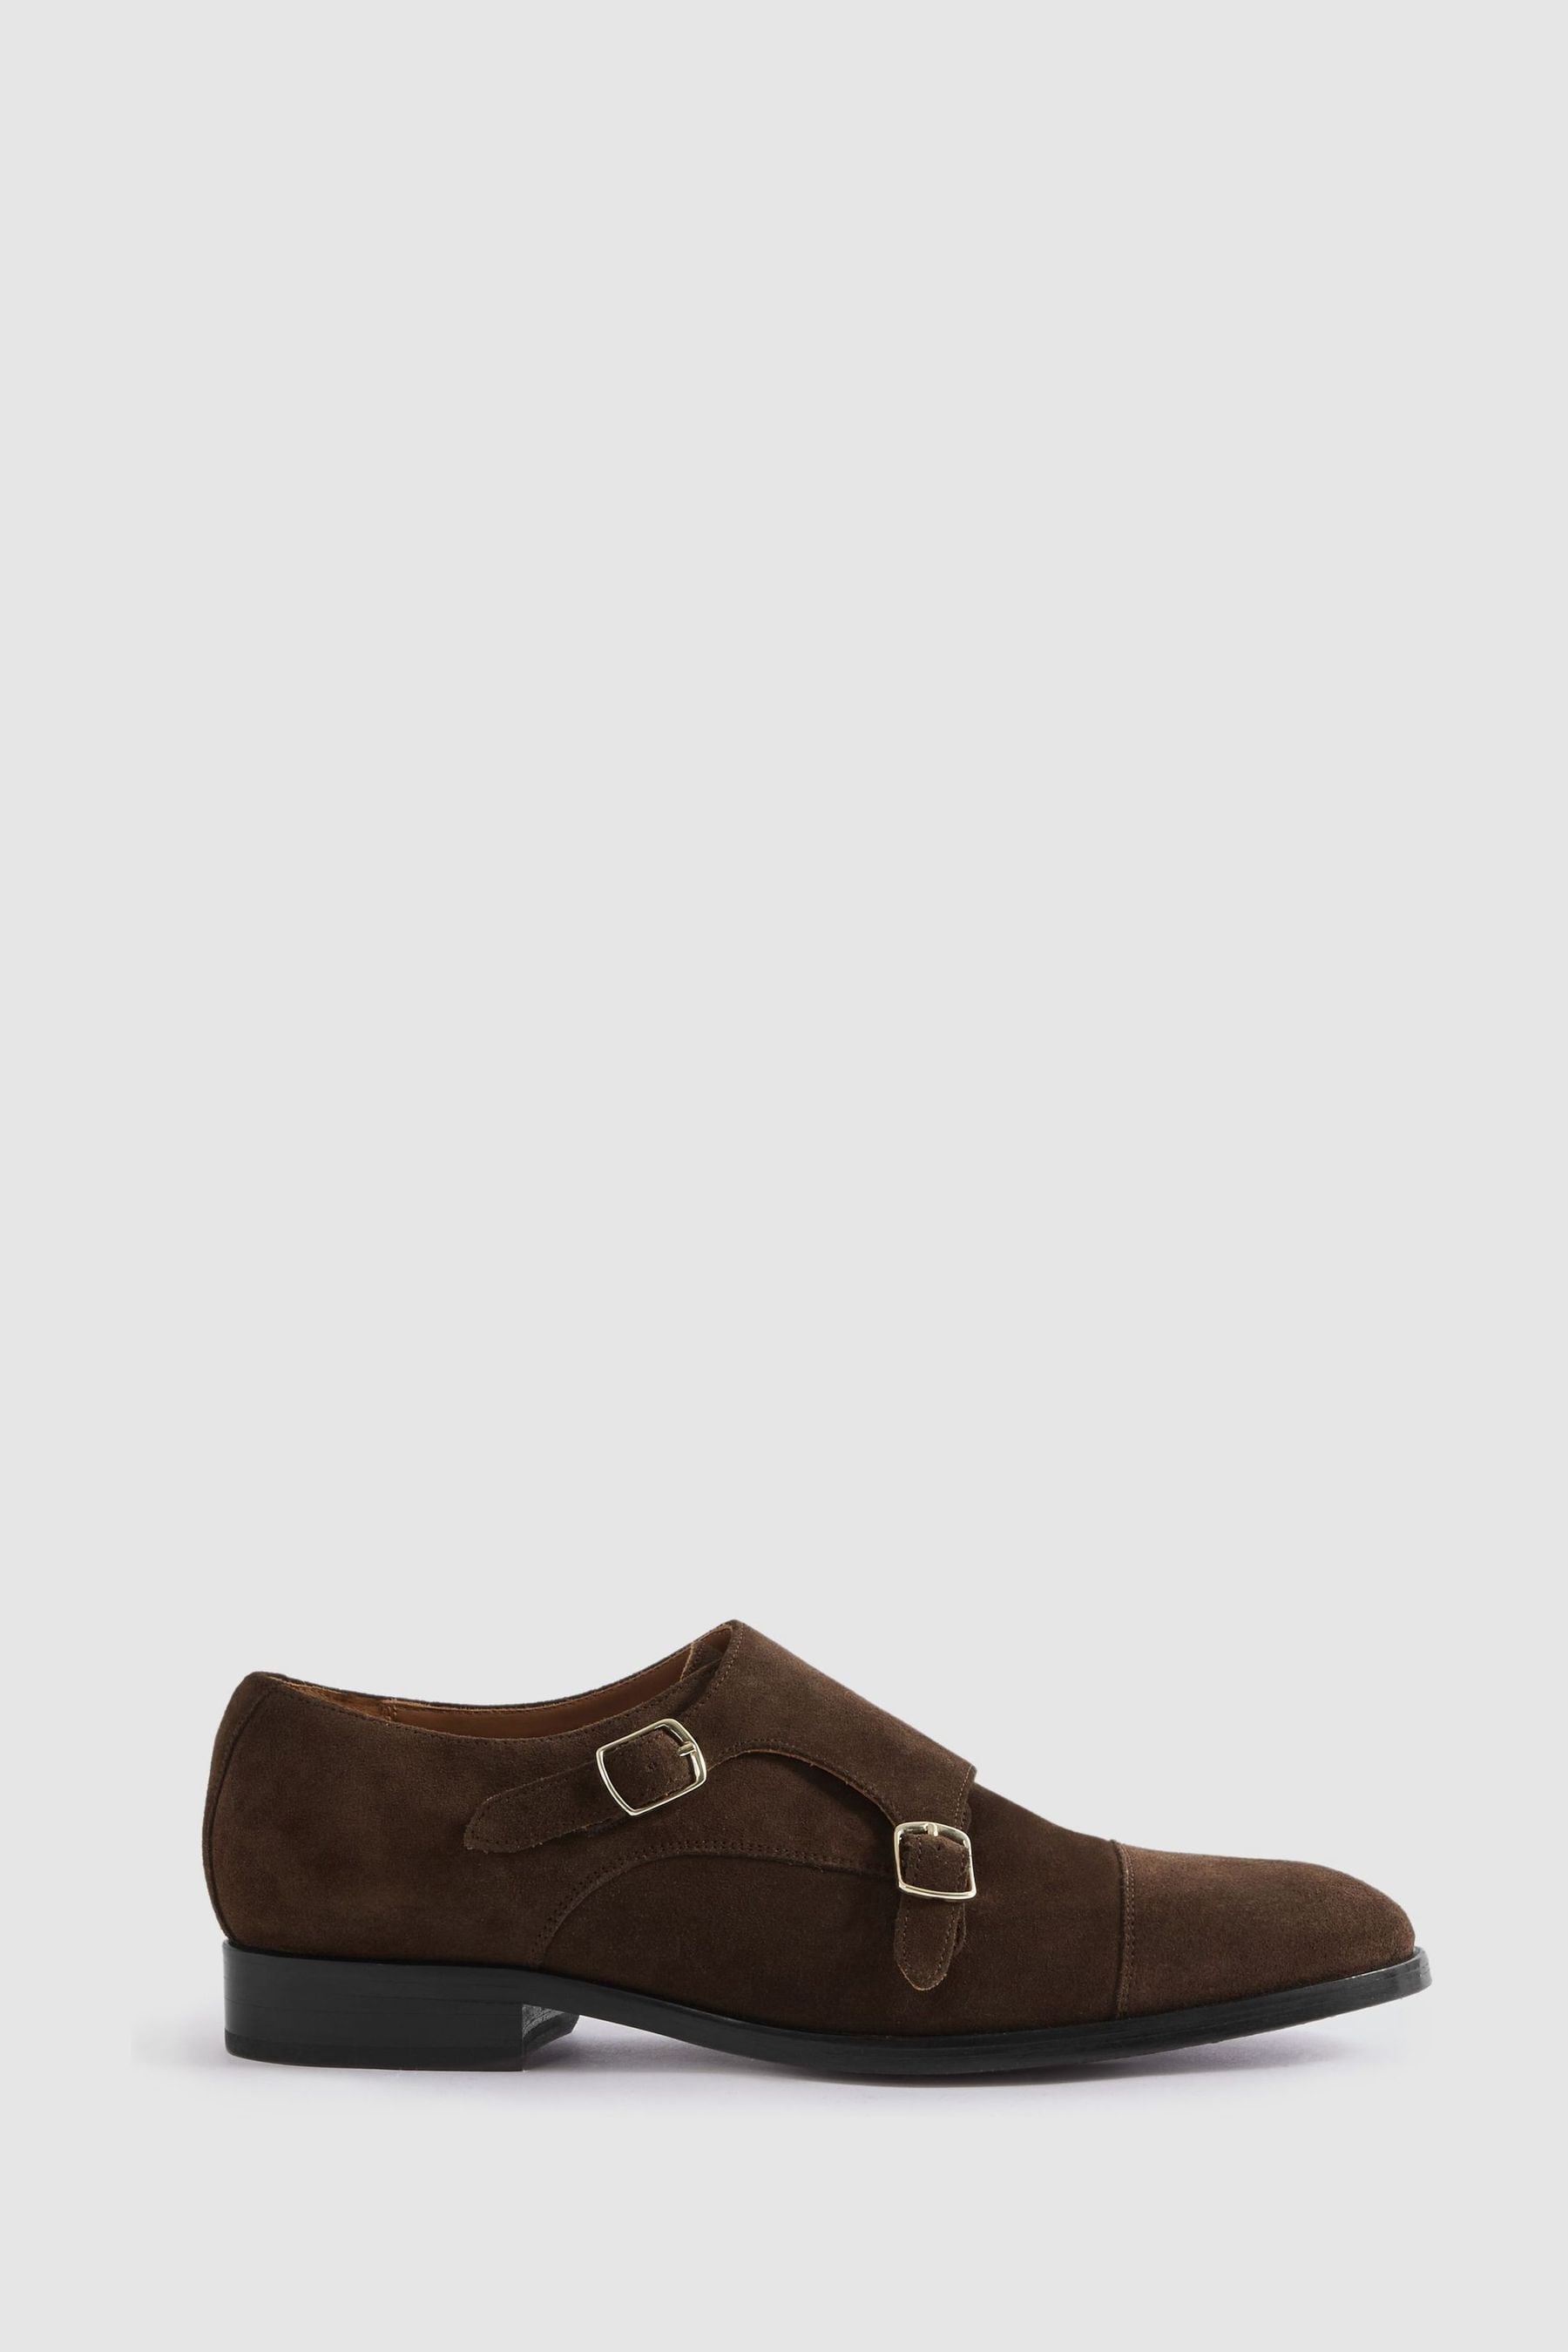 Amalfi - Brown Suede Double...